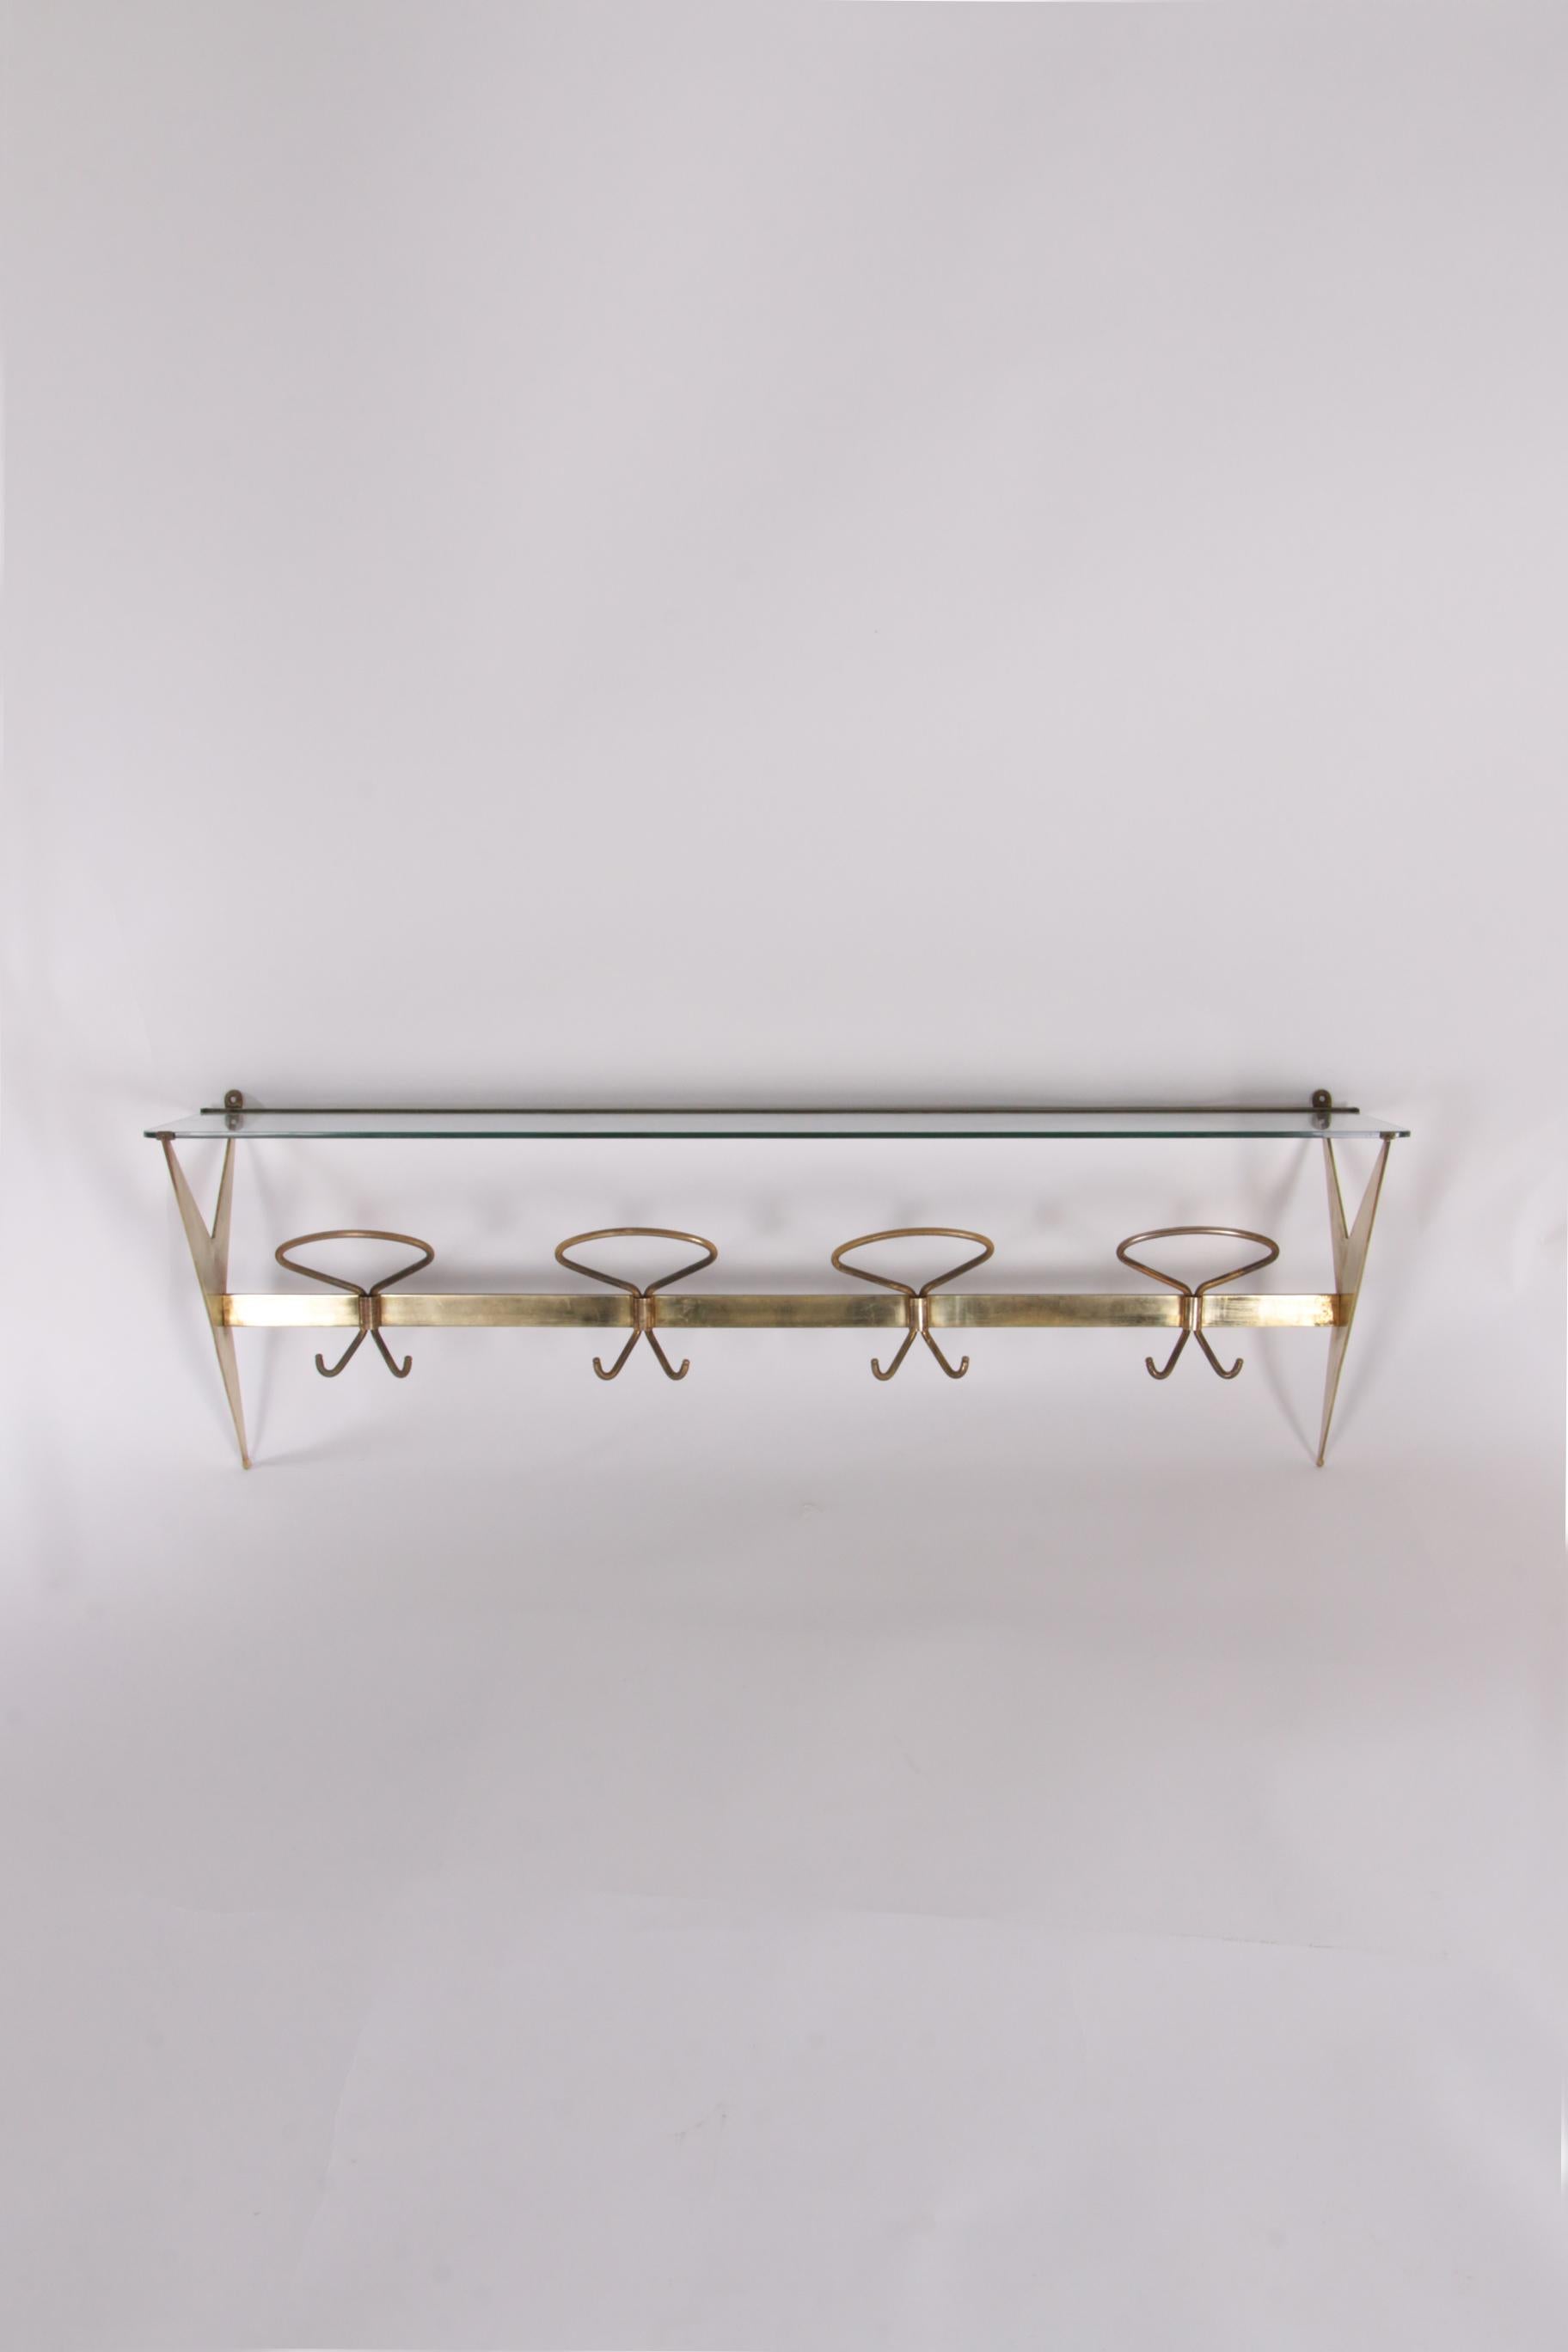 This is a coat rack made by Fontana Arte in Italy. A beautiful example of elegant design.

The coat rack was produced around the 1950s. The frame is made of brass with a glass parcel shelf to store your hats, caps and other items. The coat rack has